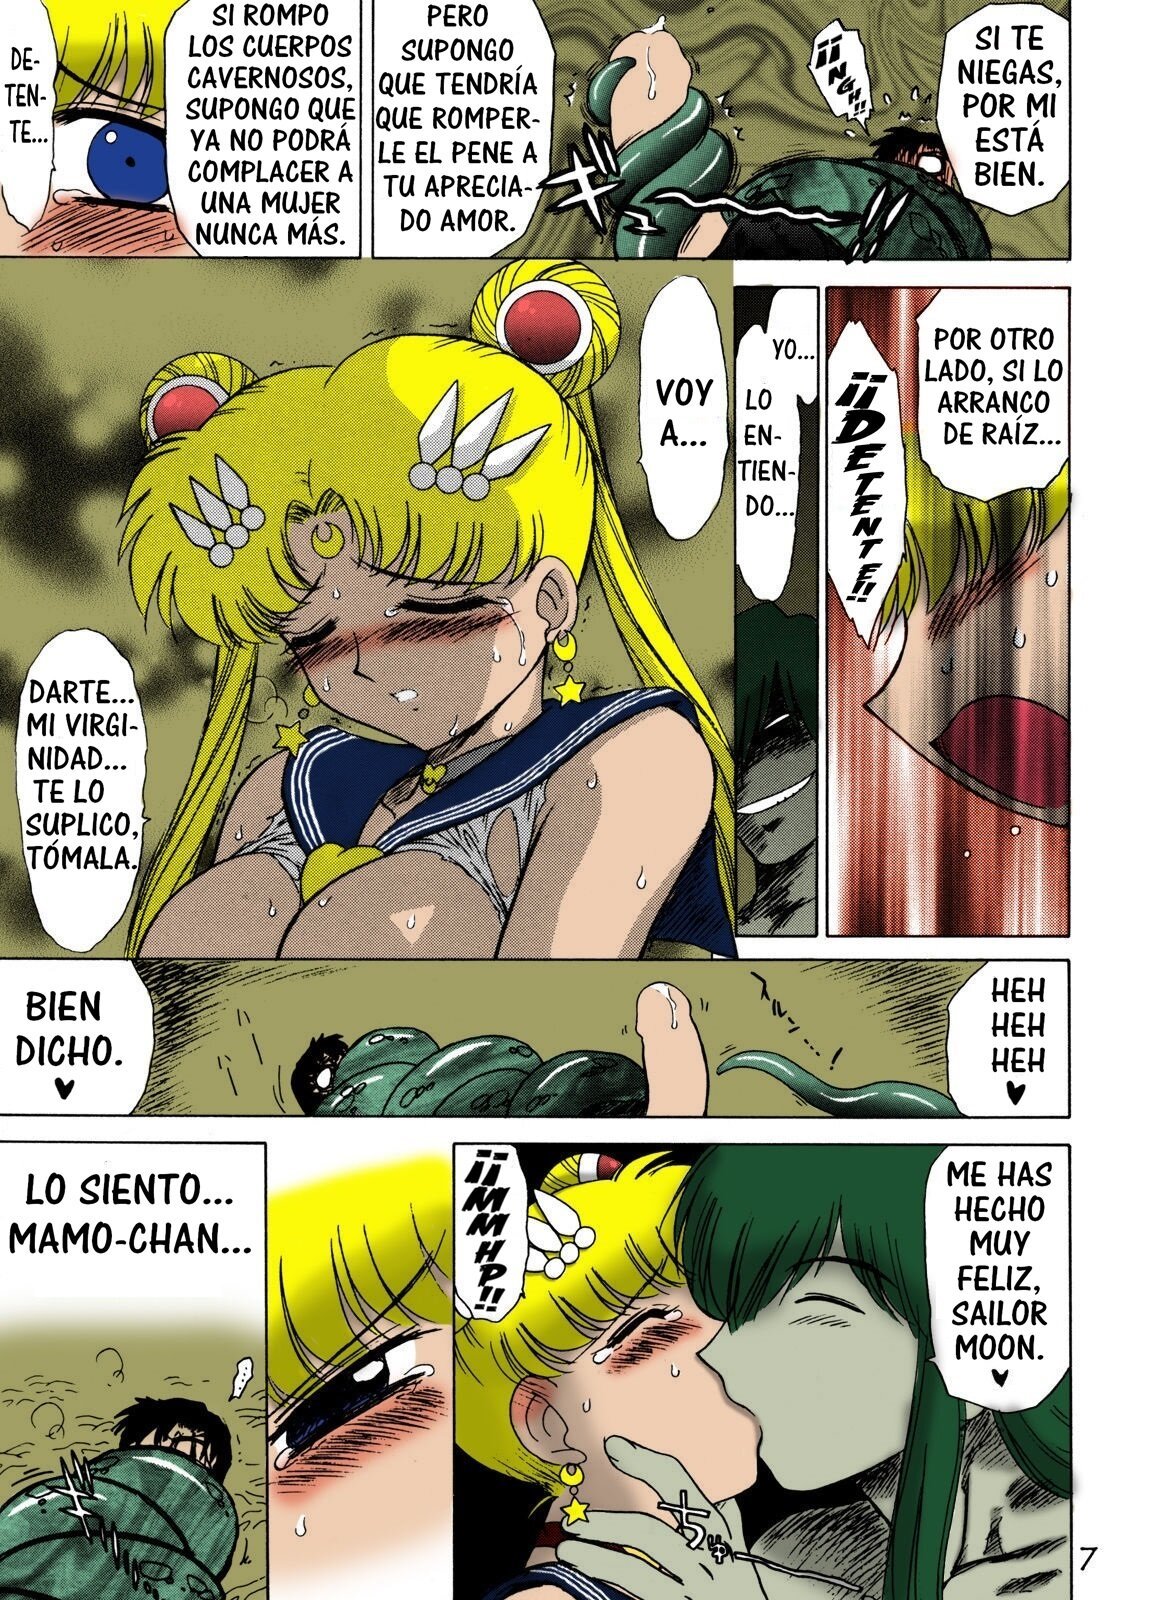 ANOTHER ONE BITE THE DUST (Bishoujo Senshi Sailor Moon) - 5